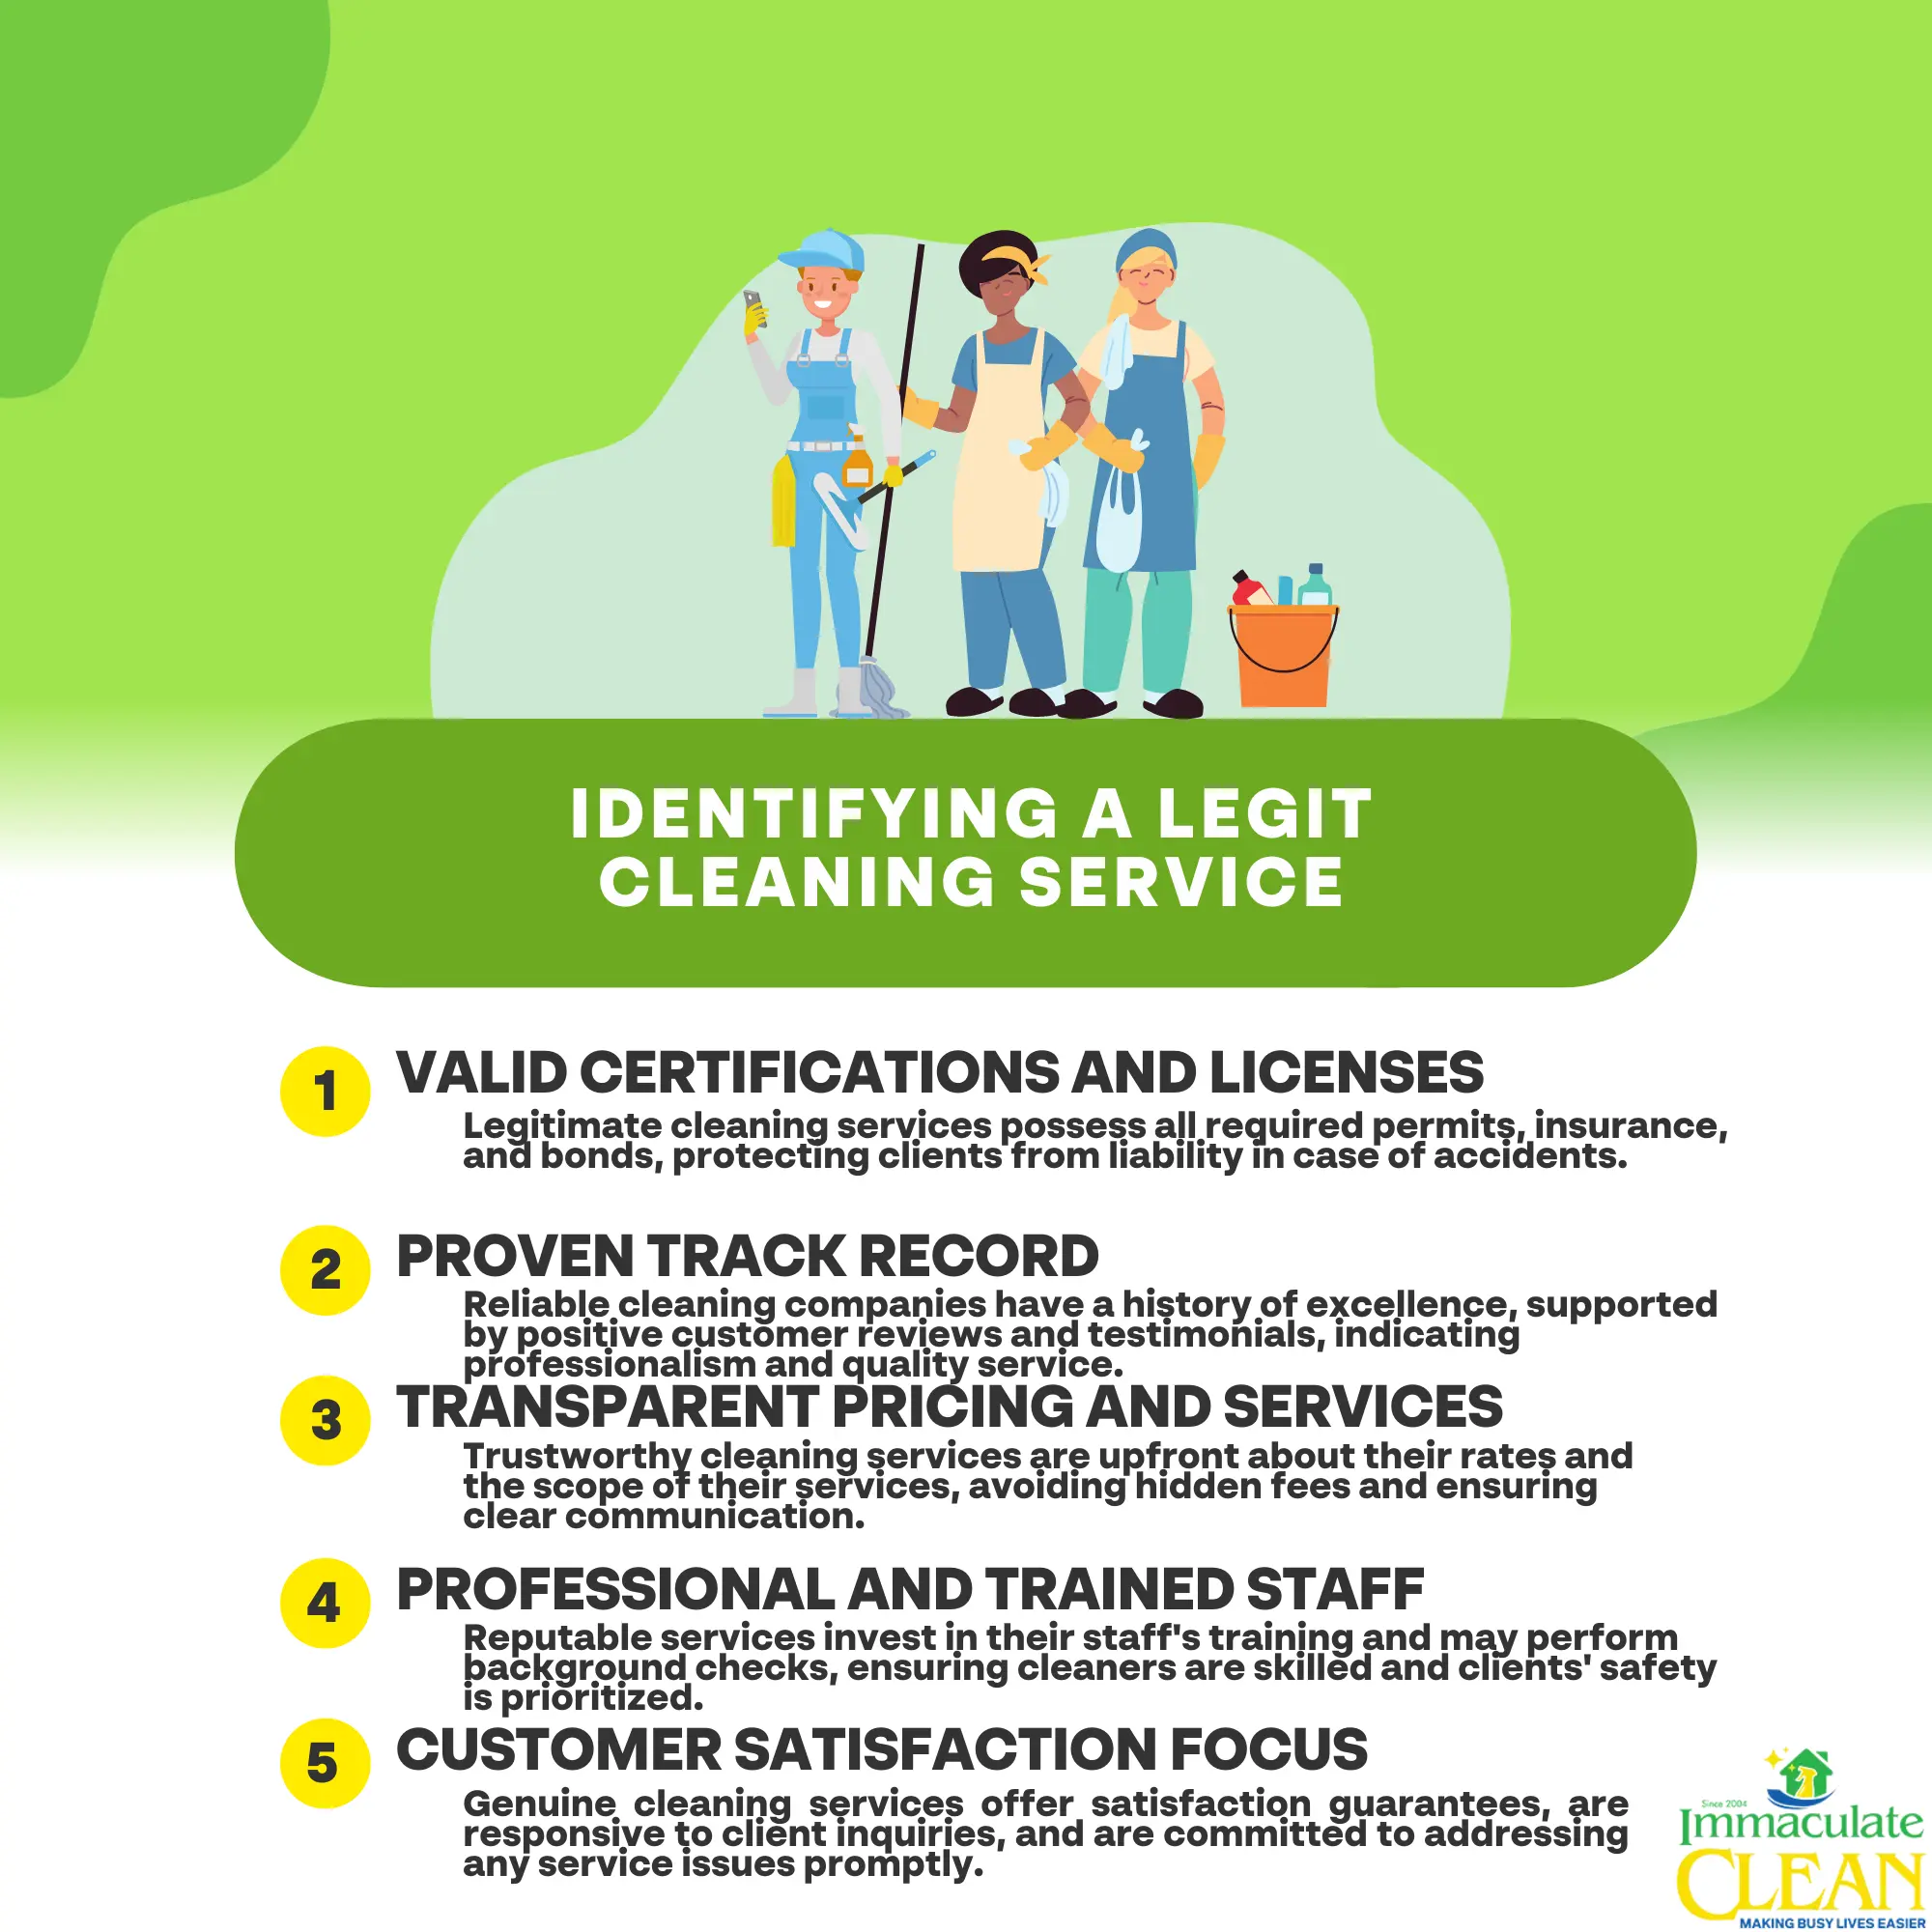 Identifying a Legit Cleaning Service